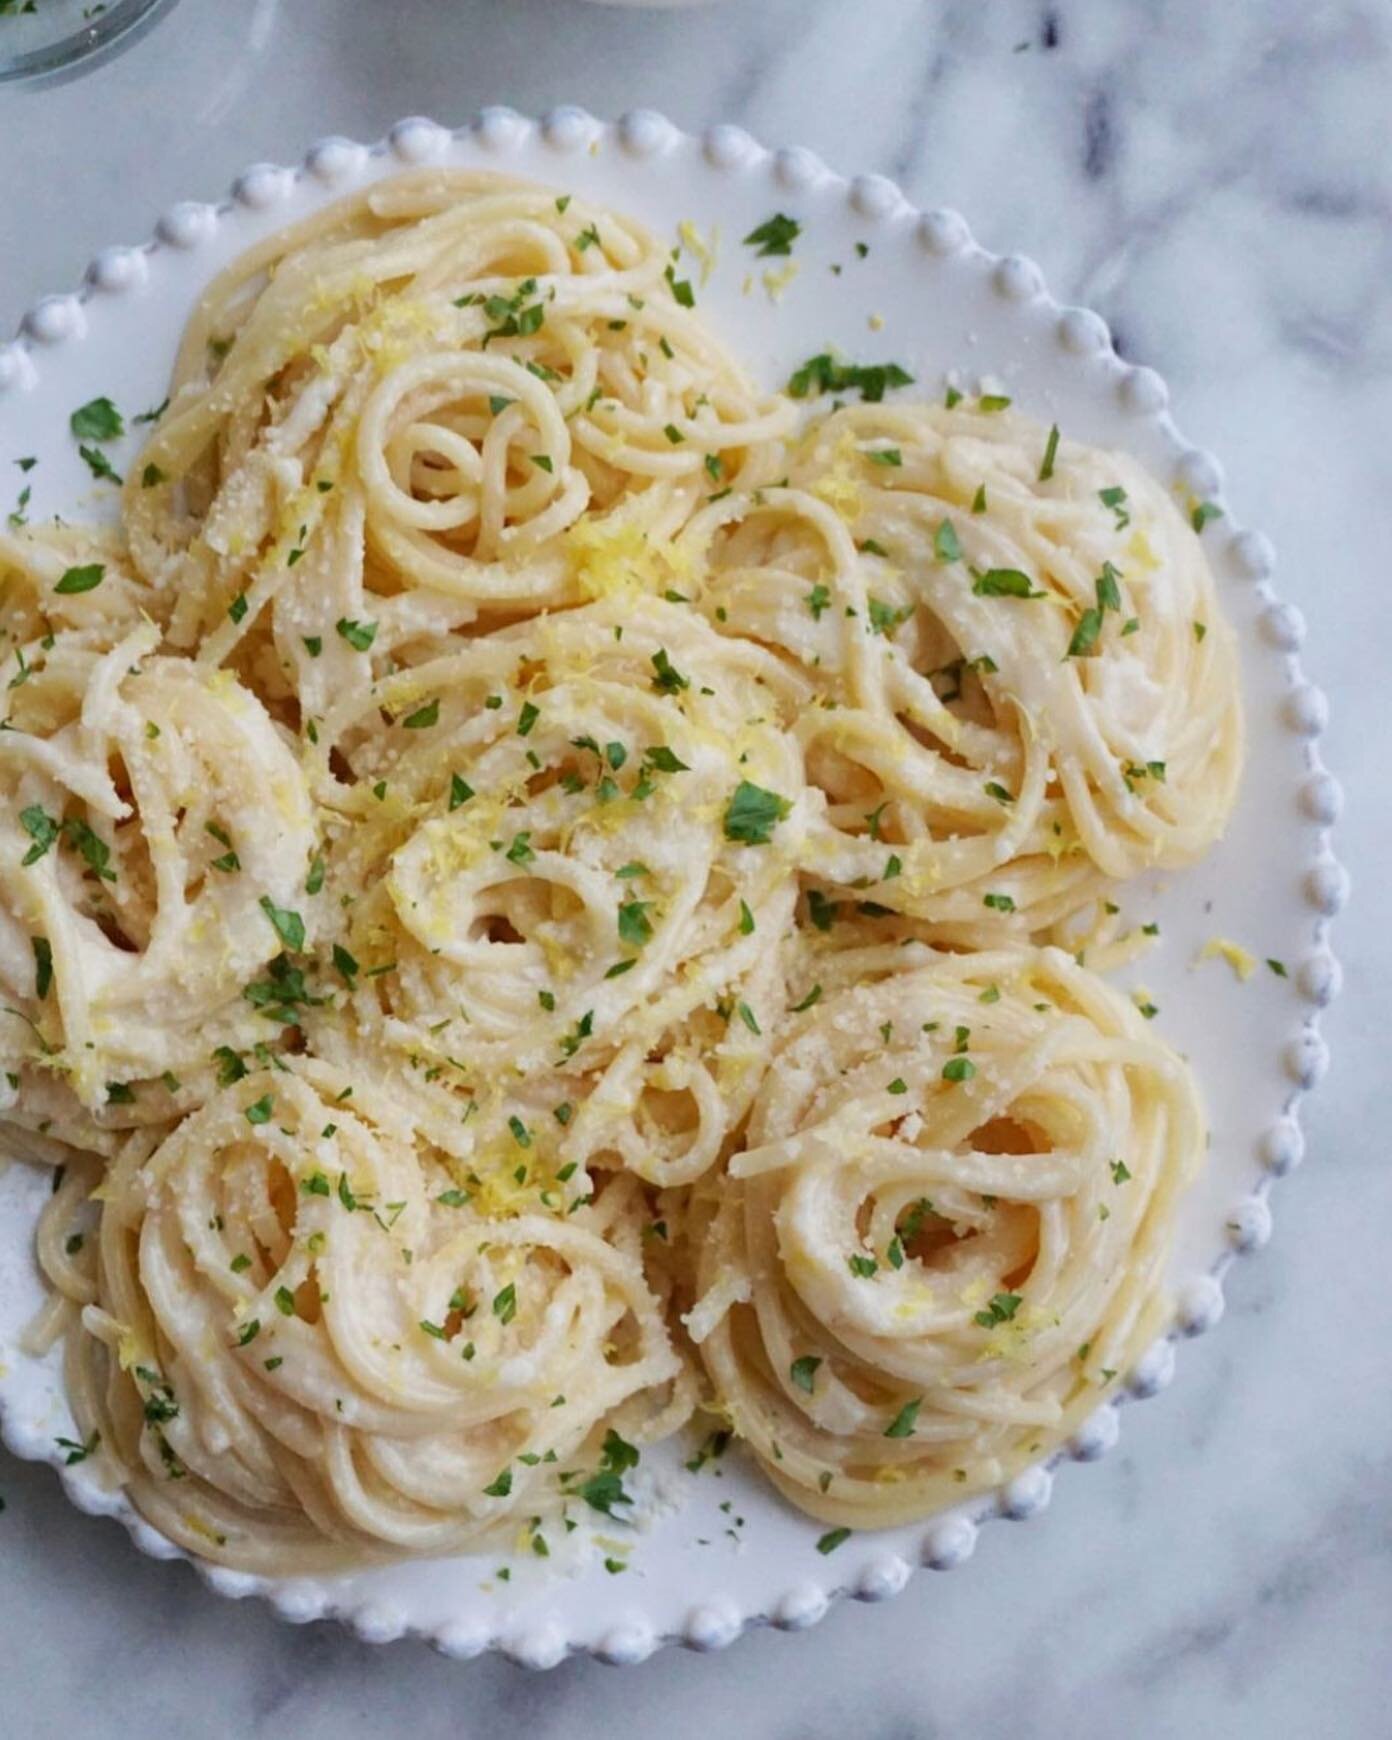 When life gives you lemons, make Spaghetti Limone! 🍝🍋 Check out the recipe for this super easy Spaghetti Limone at my new pasta account @thepastatable where I share all of my favorite pasta recipes! 📸 @thepastatable #pasta #NYCFoodComa